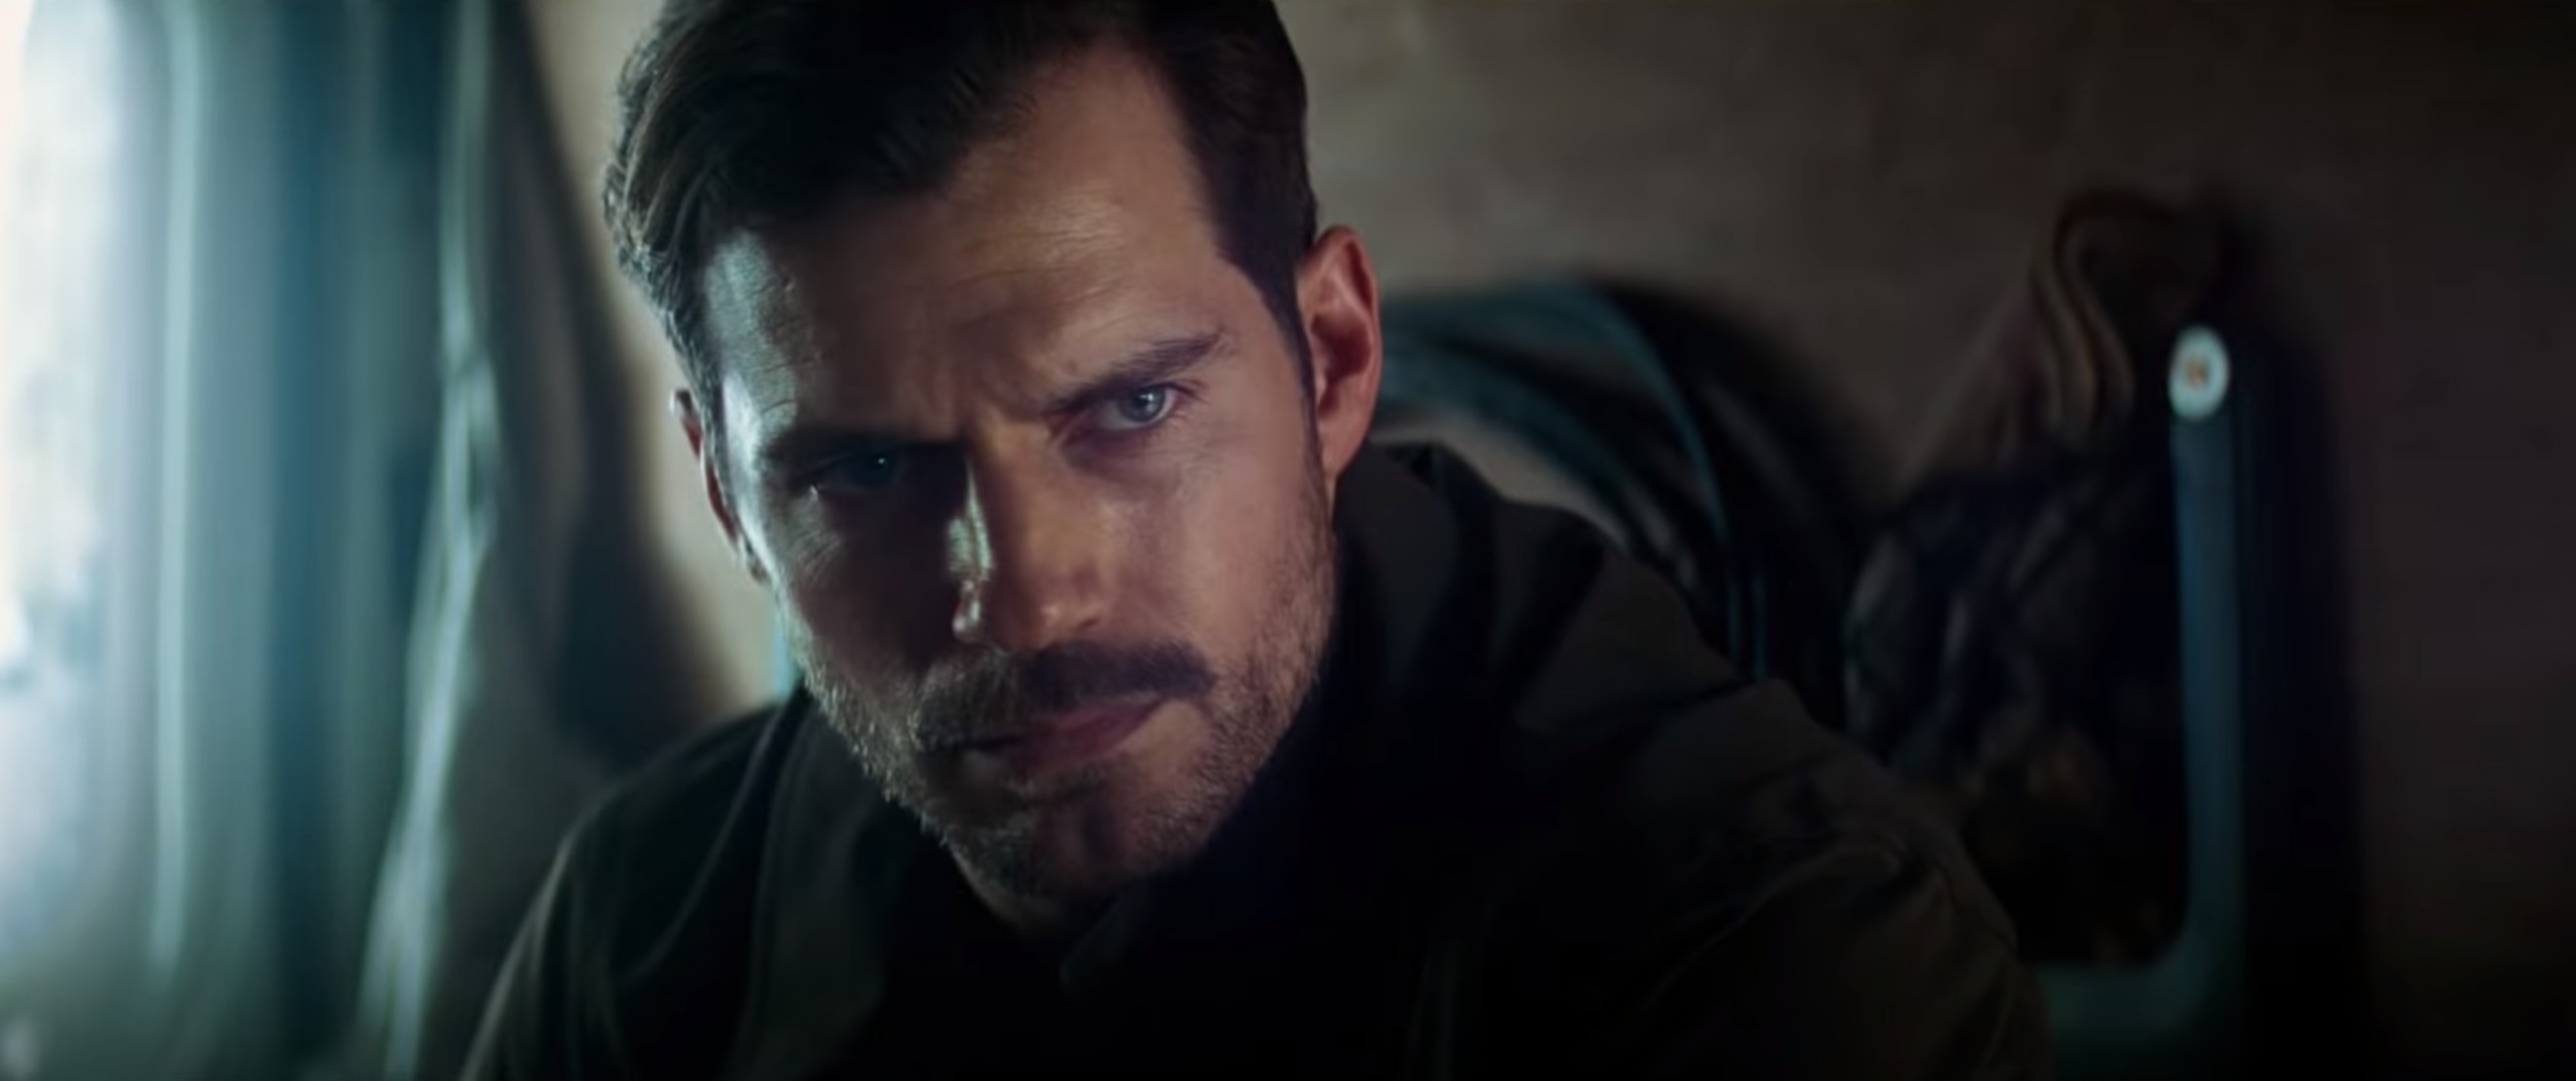 Henry Cavill - Mission Impossible Fallout 